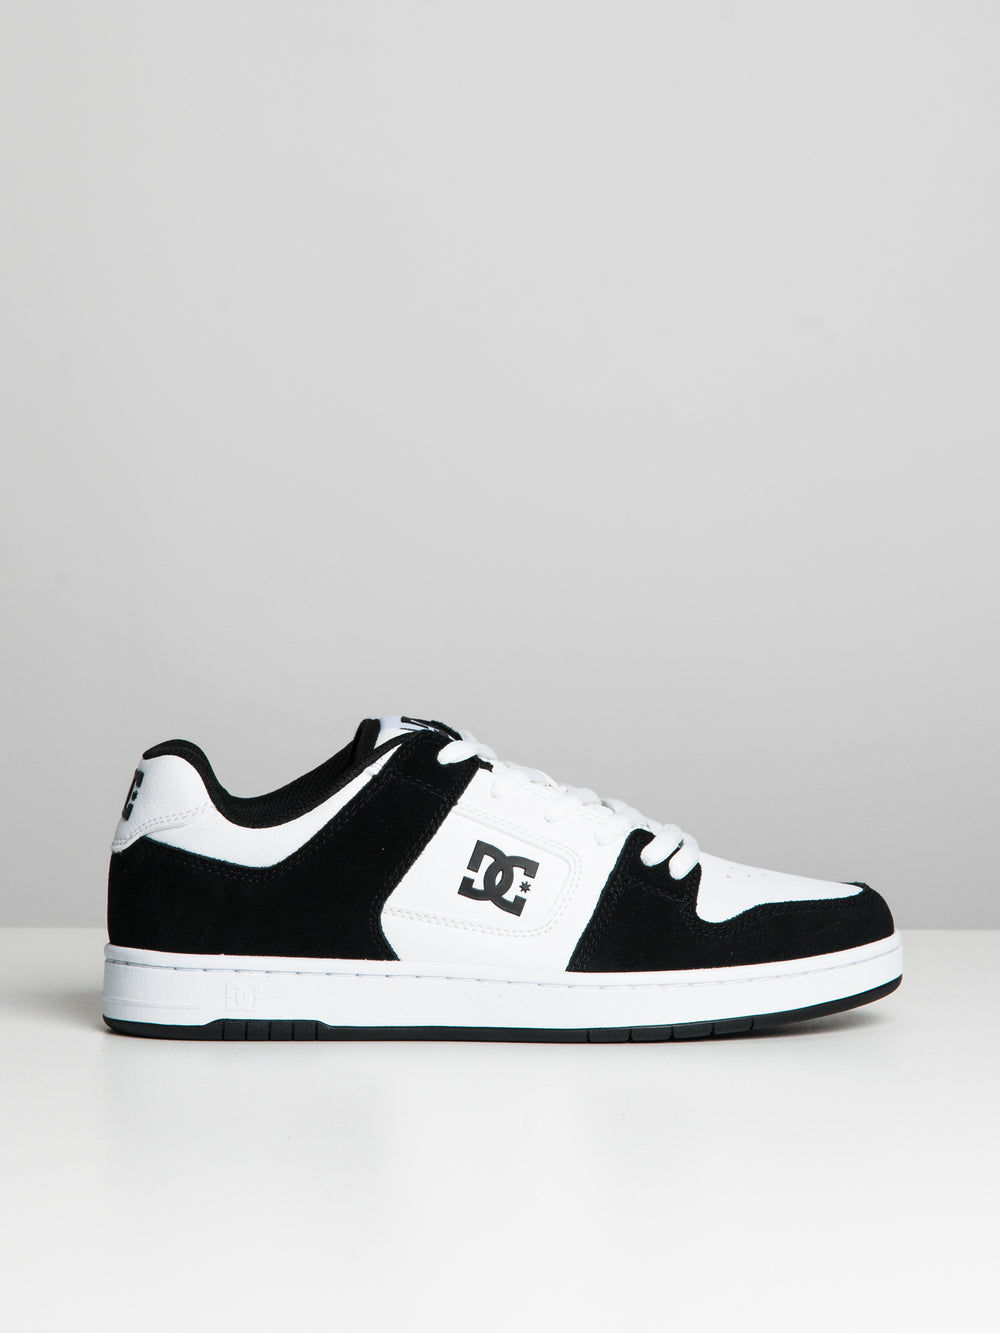 MENS DC SHOES MANTECA 4 - CLEARANCE